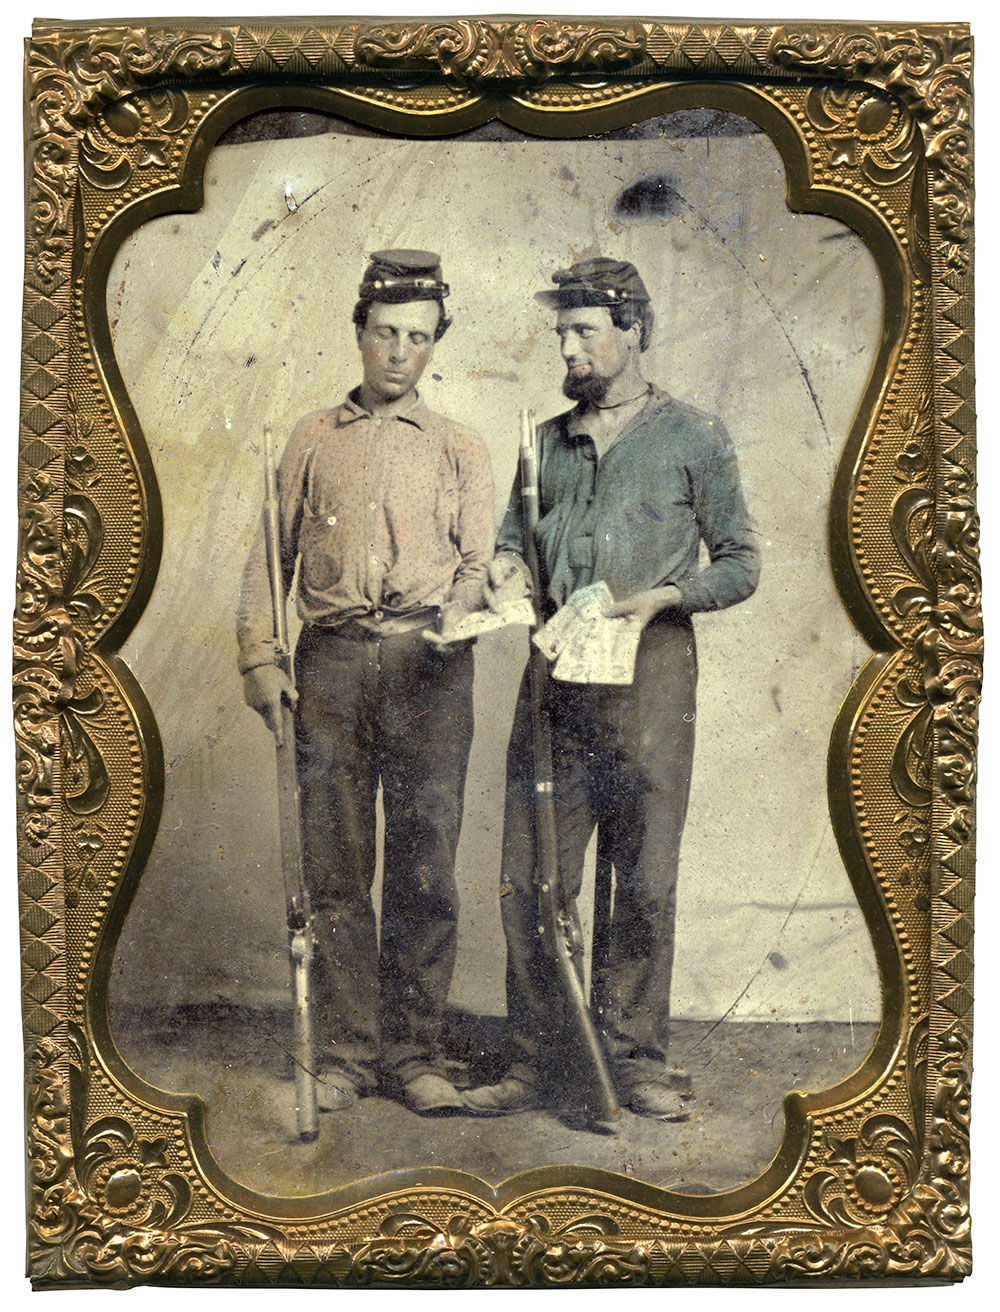 Quarter-plate tintype by an anonymous photographer.